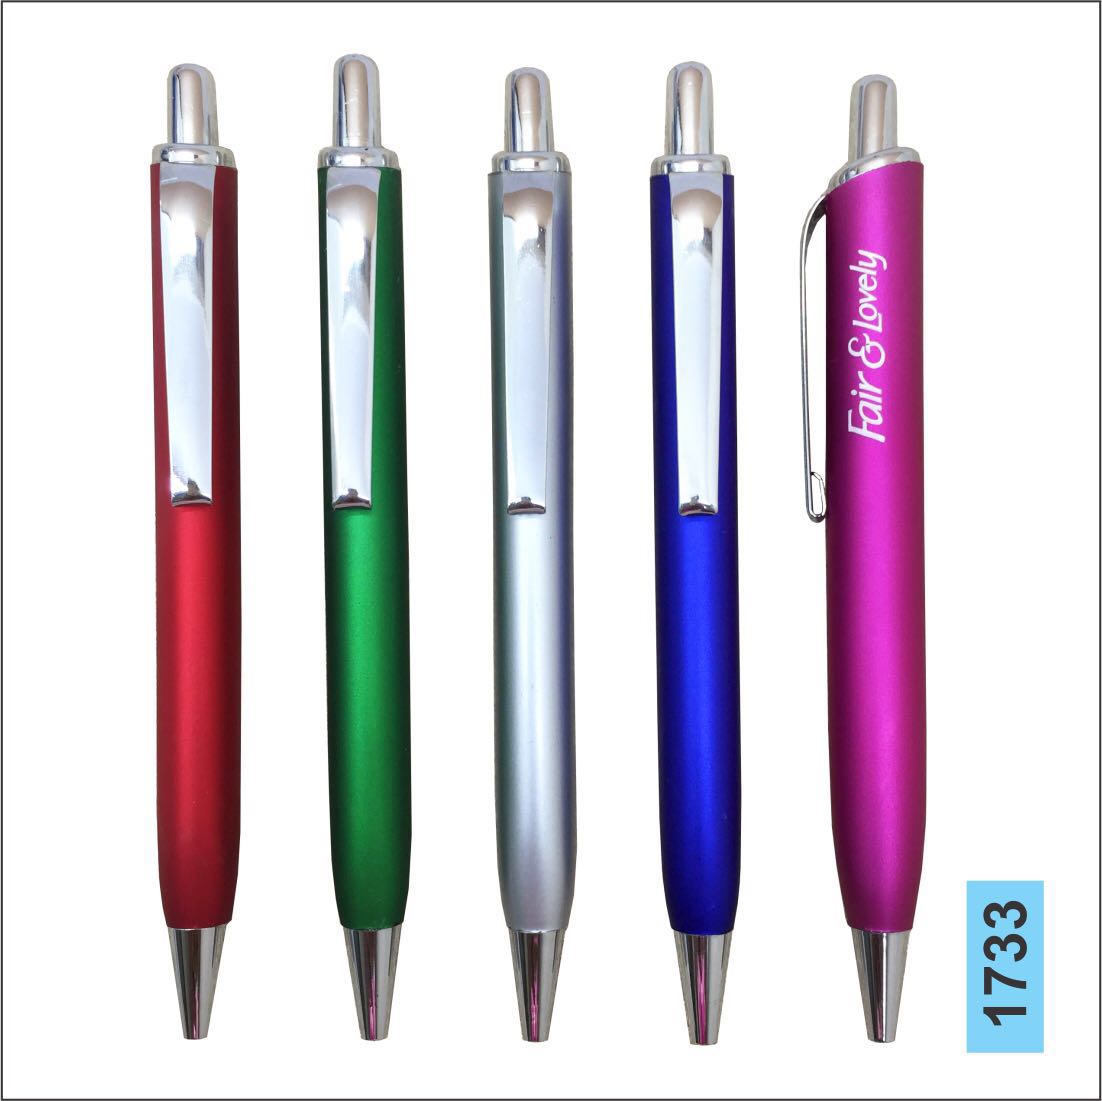 Power Bank Manufacturers in Chennai